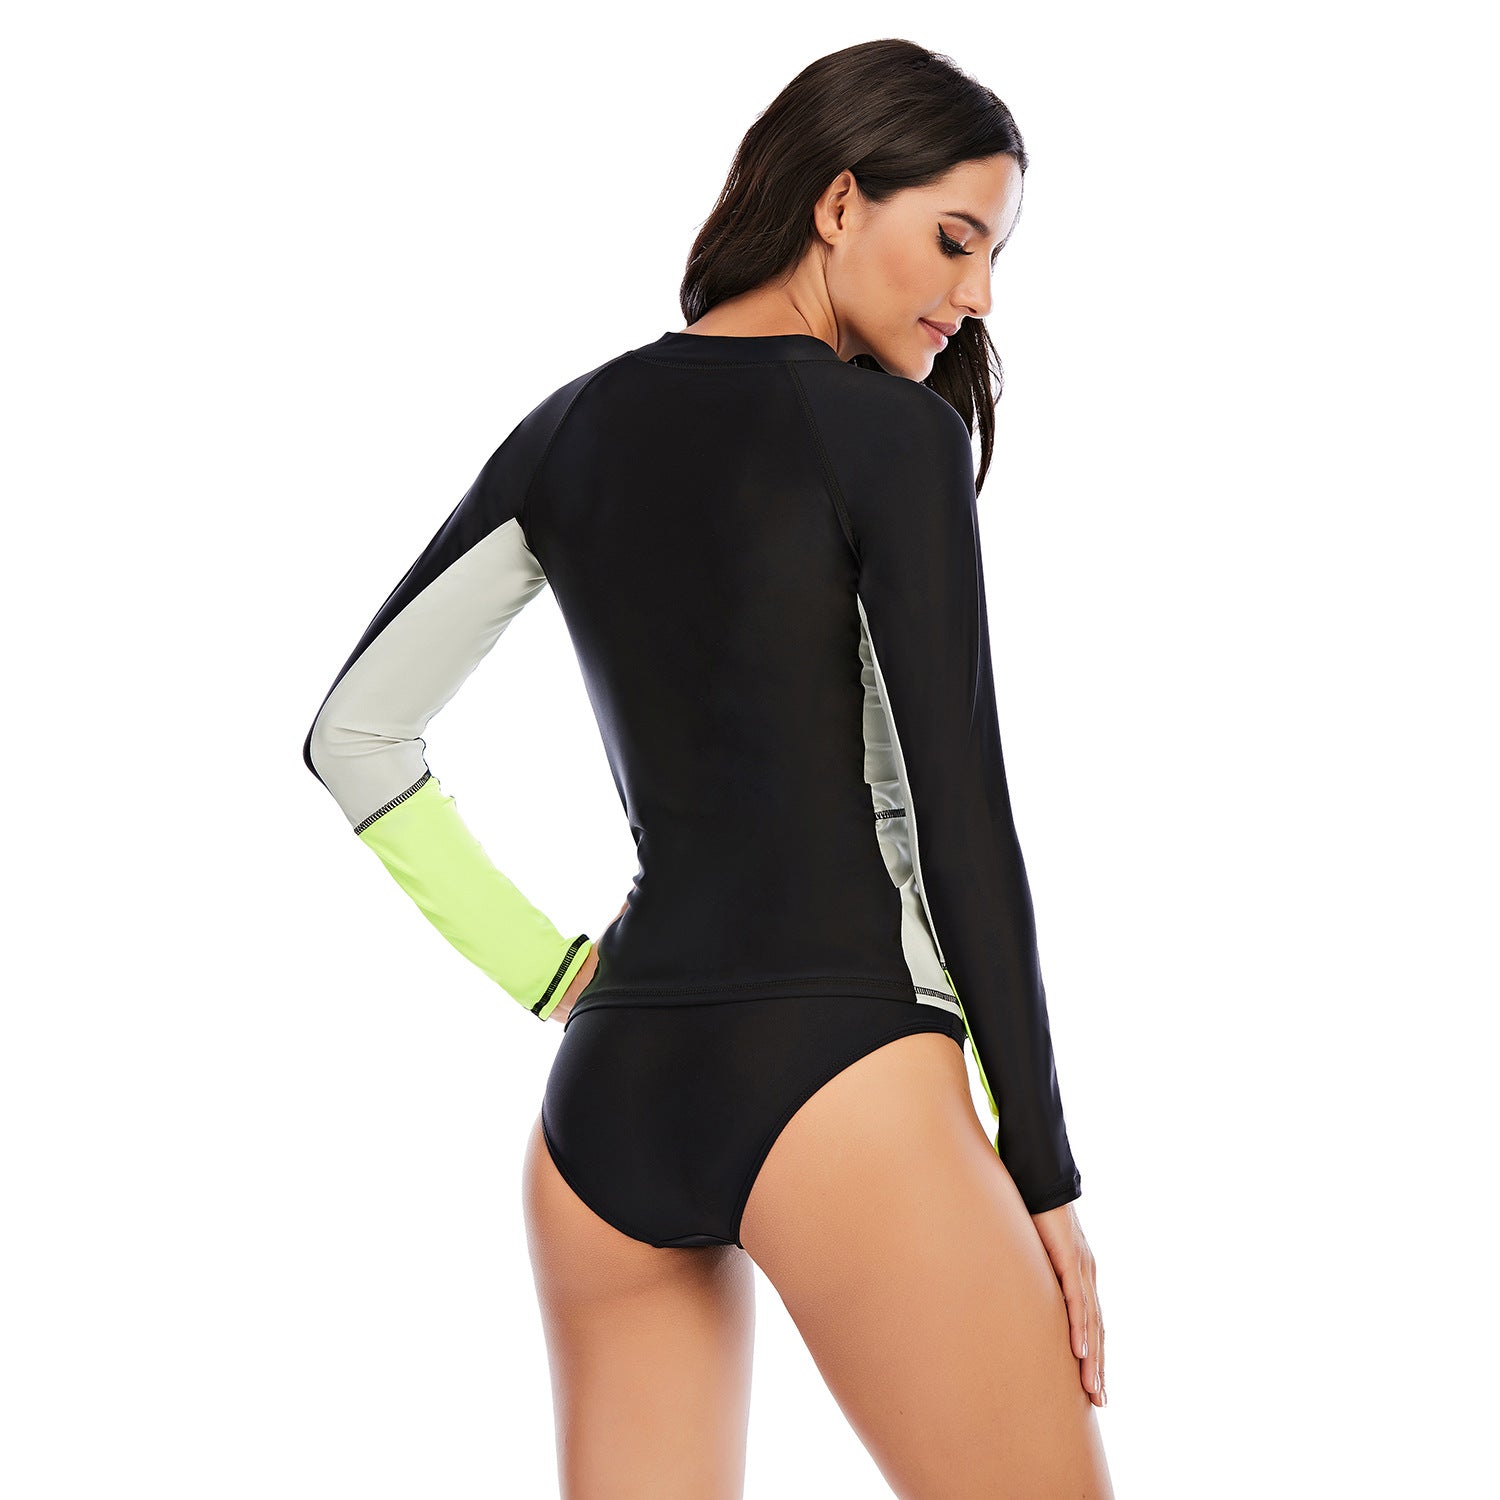 Black Surf Suit Split Long Sleeve Women's Swimsuit Sunscreen Swimsuit with Zipper--Free Shipping at meselling99